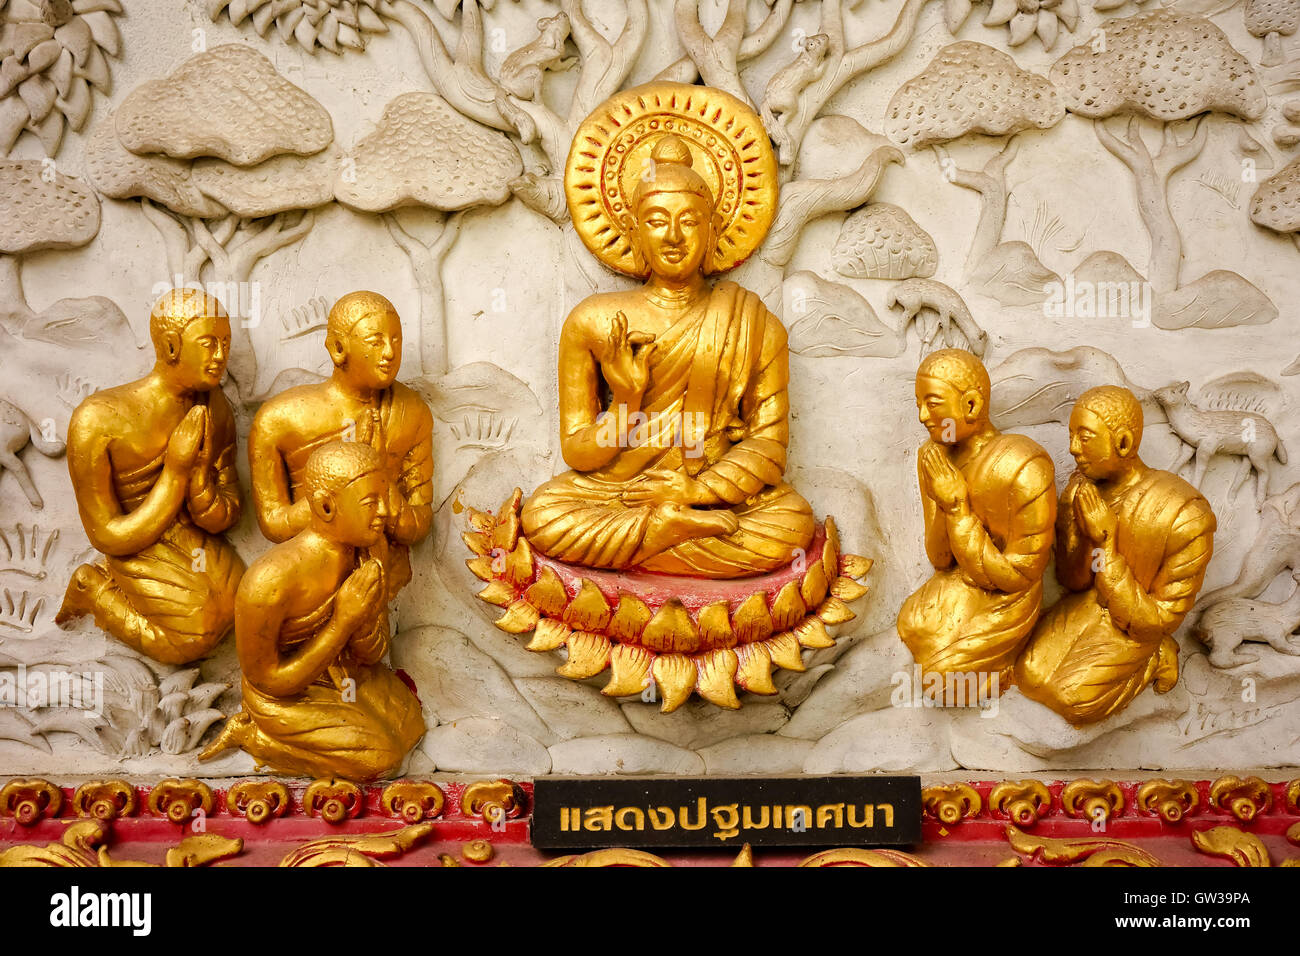 Traditional Thai style art sculpture on temple's wall Stock Photo